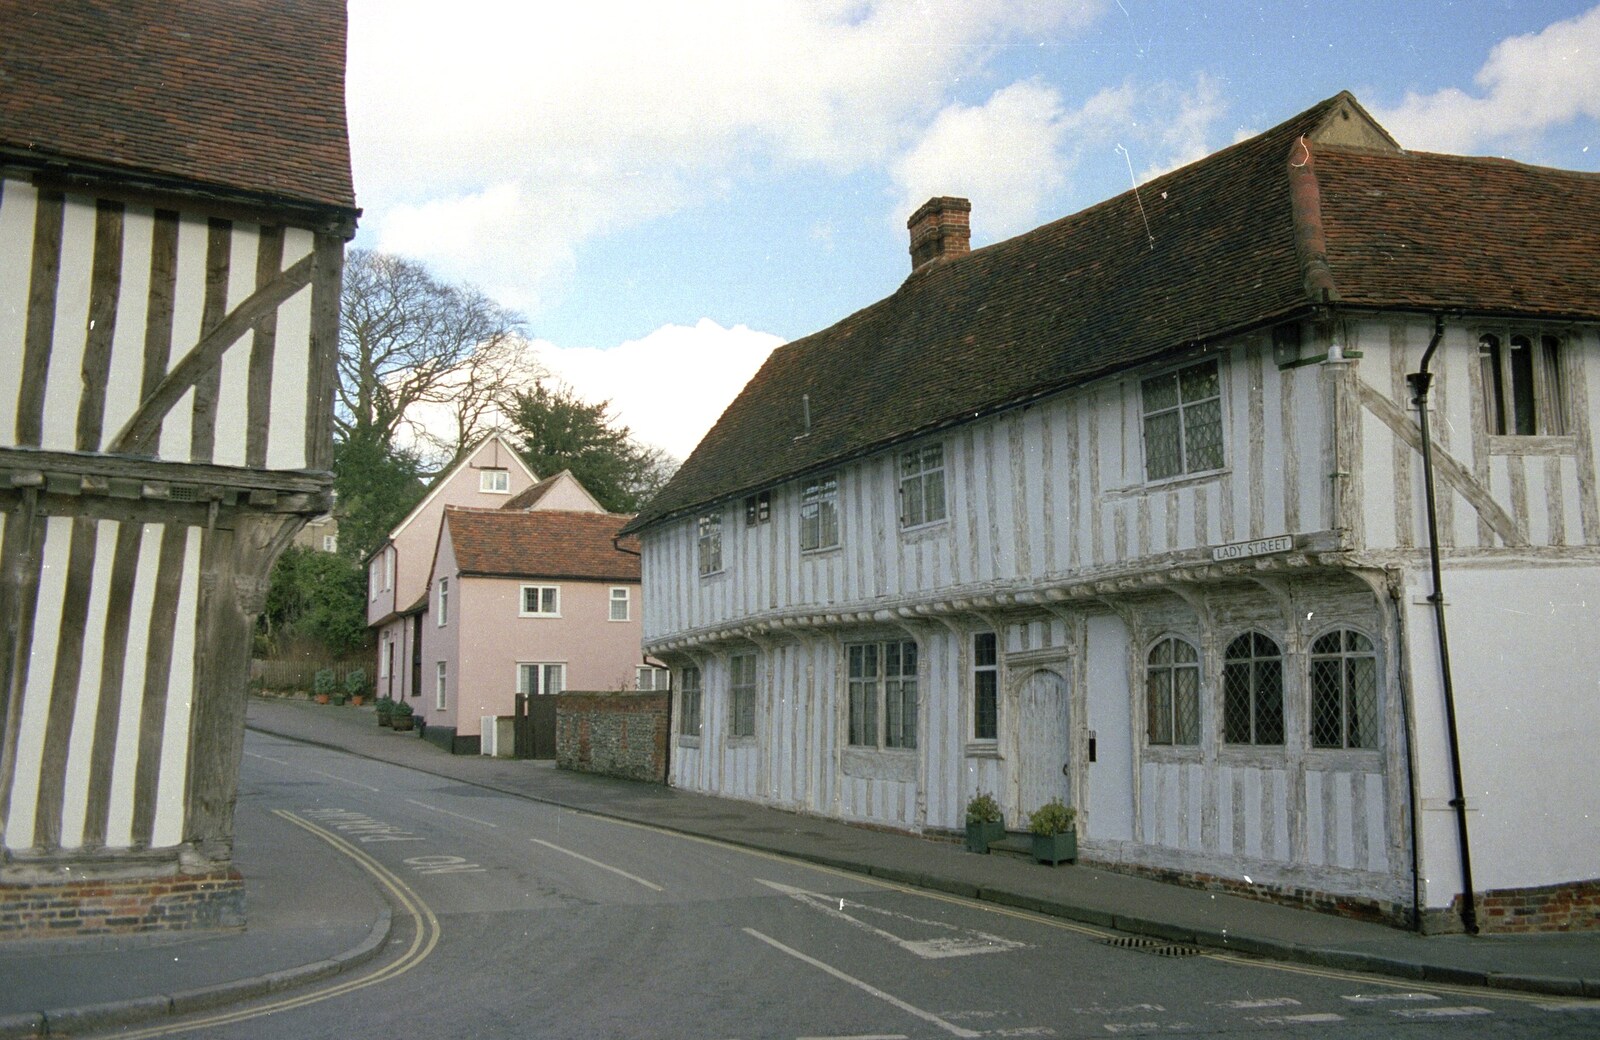 Another timber-framed building from Mother and Mike Visit, Lavenham, Suffolk - 14th April 1996